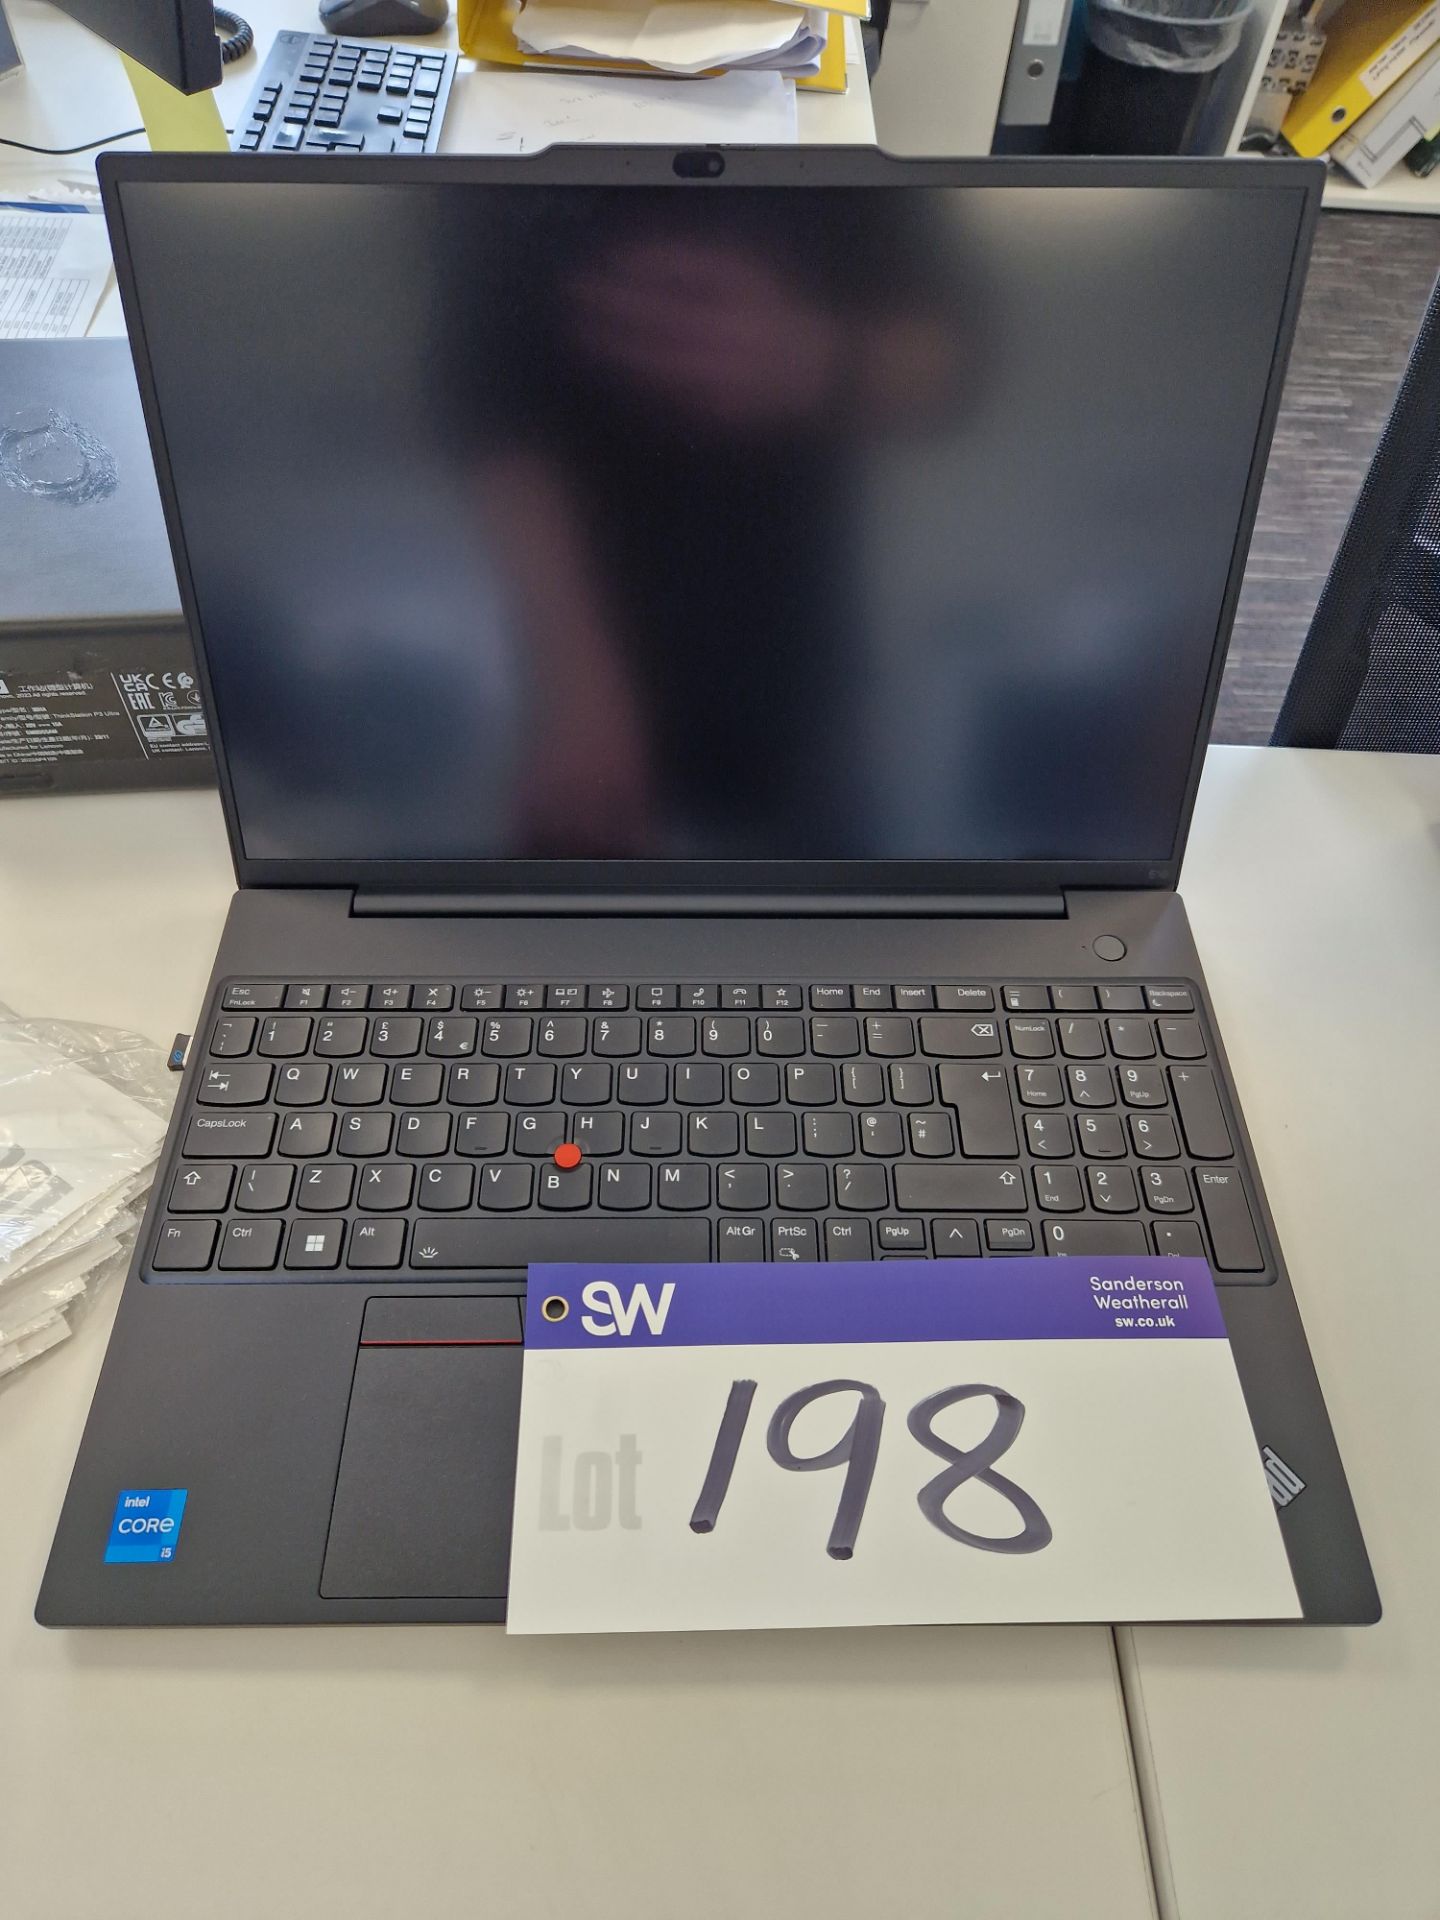 Lenovo Thinkpad E16 Gen 1 Core i5 Laptop (No Charger) (Hard Drive Wiped) Please read the following